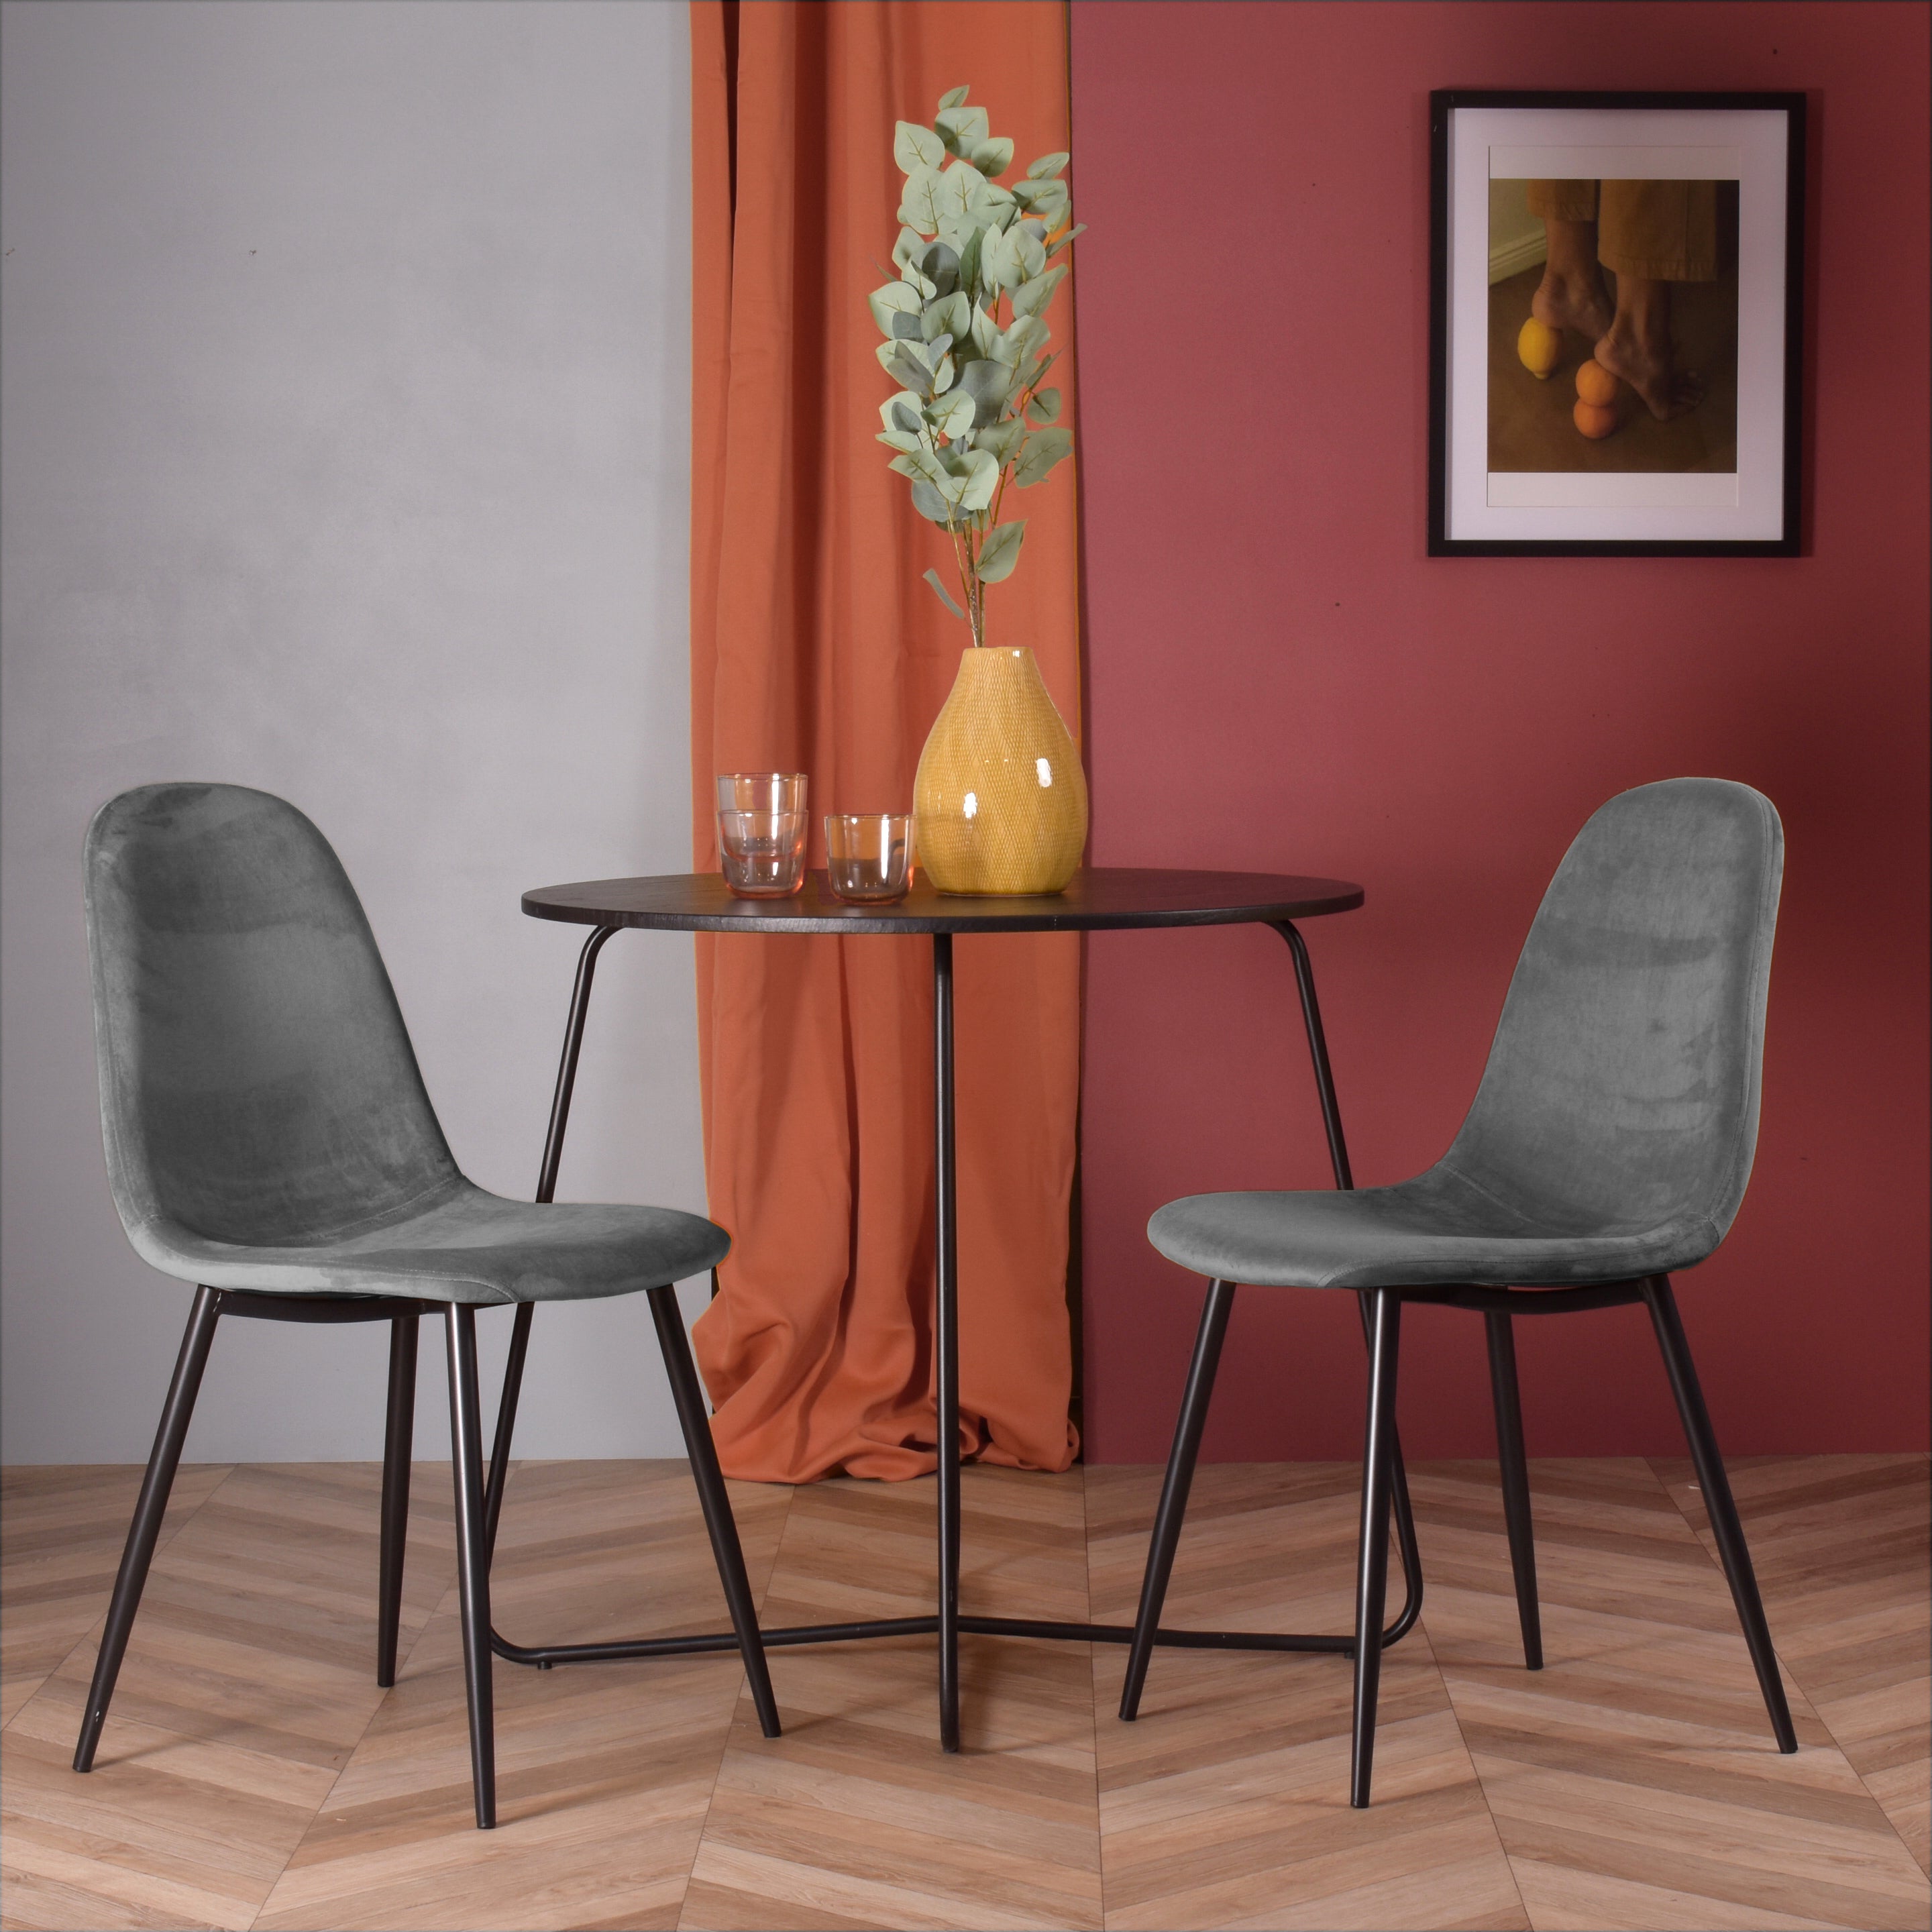 Set of 4 designer fabric chairs for dining room - CHARLTON